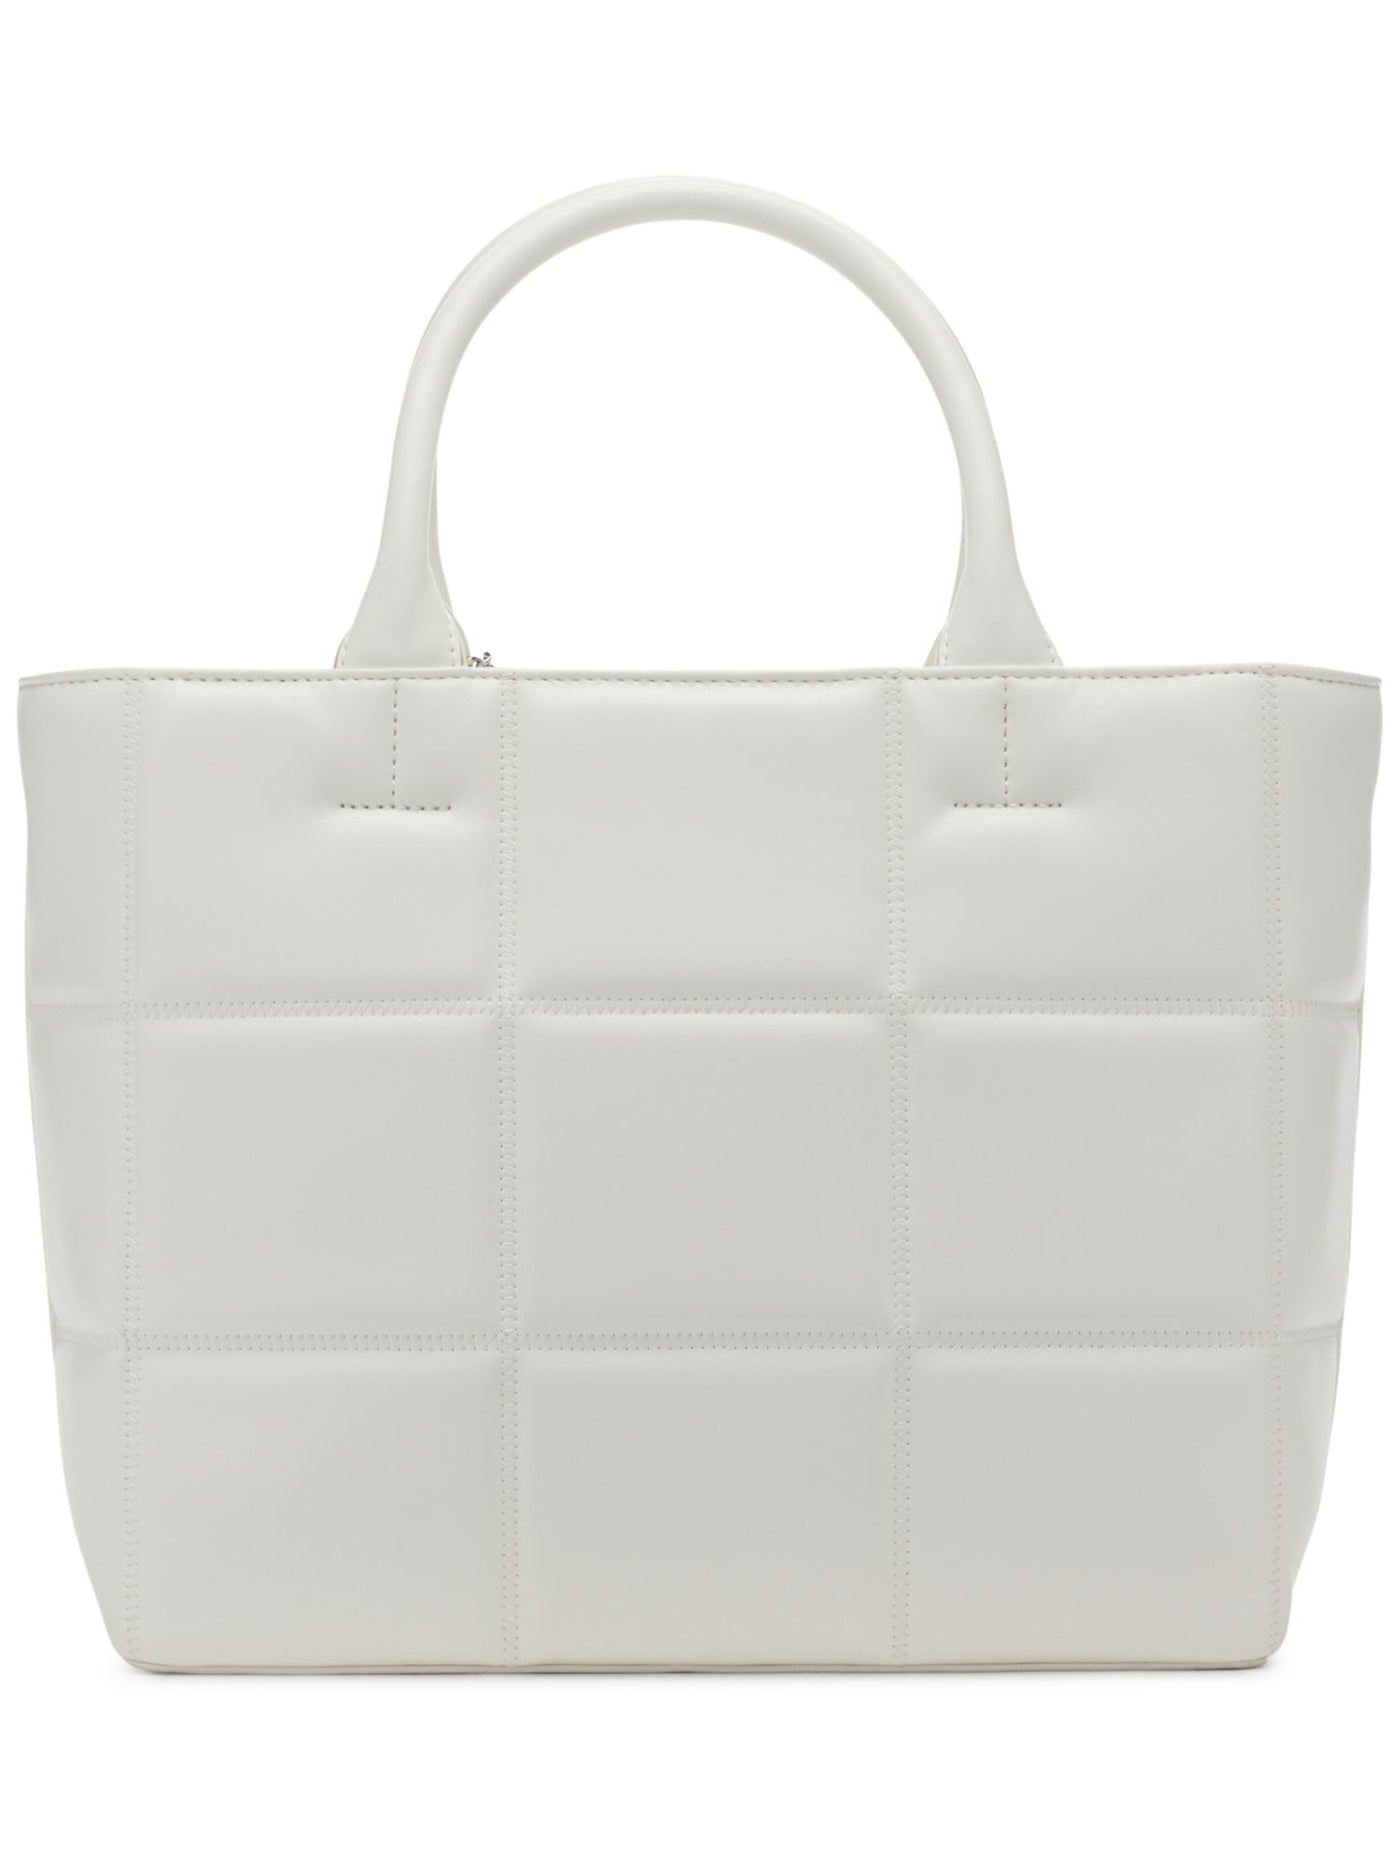 DKNY Women's White Quilted PVC Adjustable Detachable 23In Strap Double Flat Strap Tote Handbag Purse